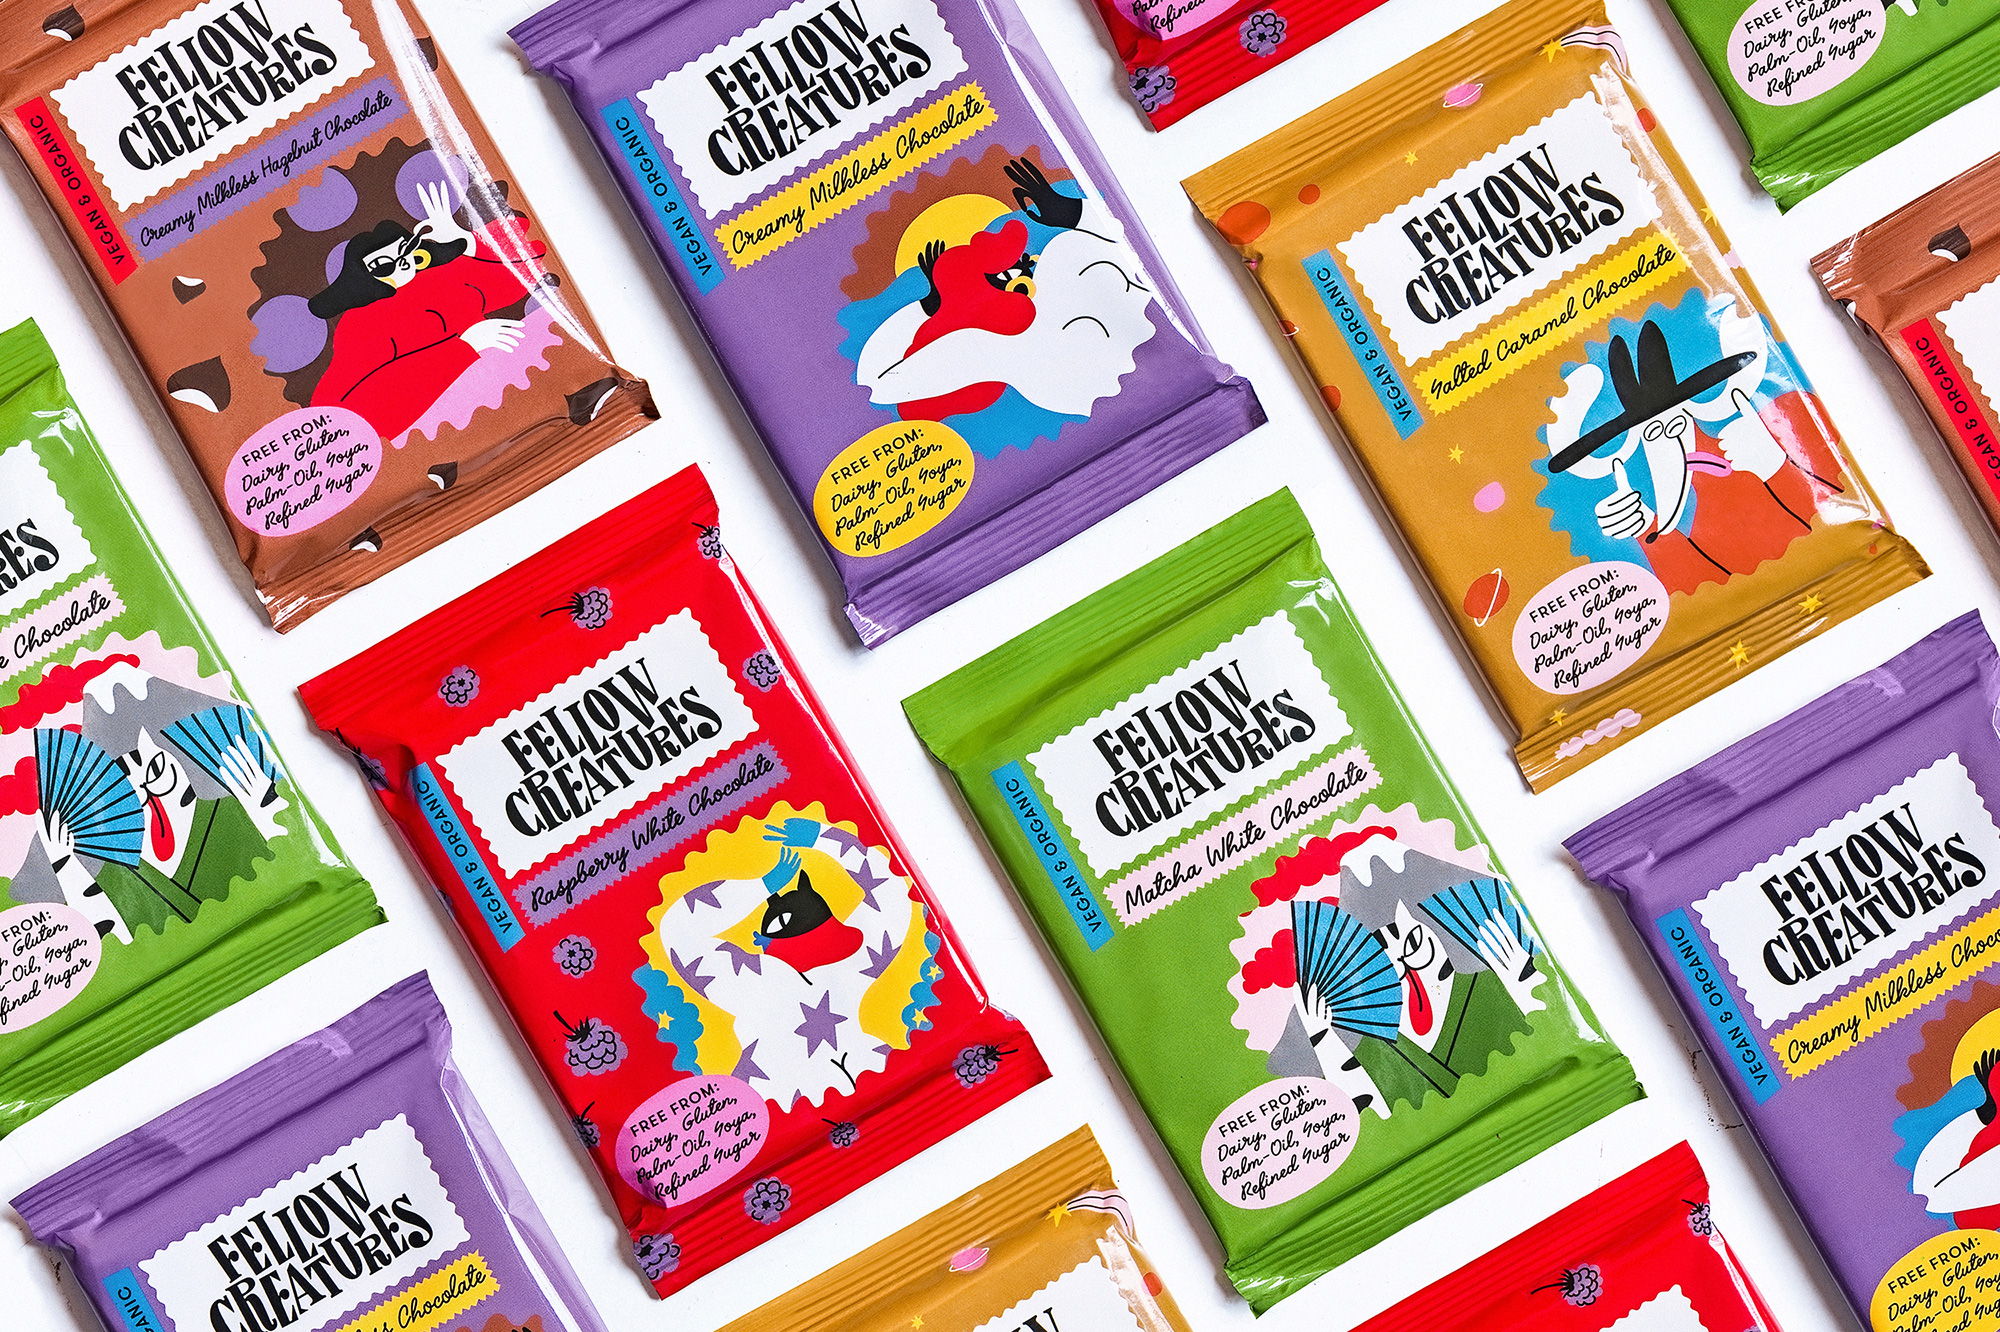 New Logo and Packaging for Fellow Creatures by Classmate Studio